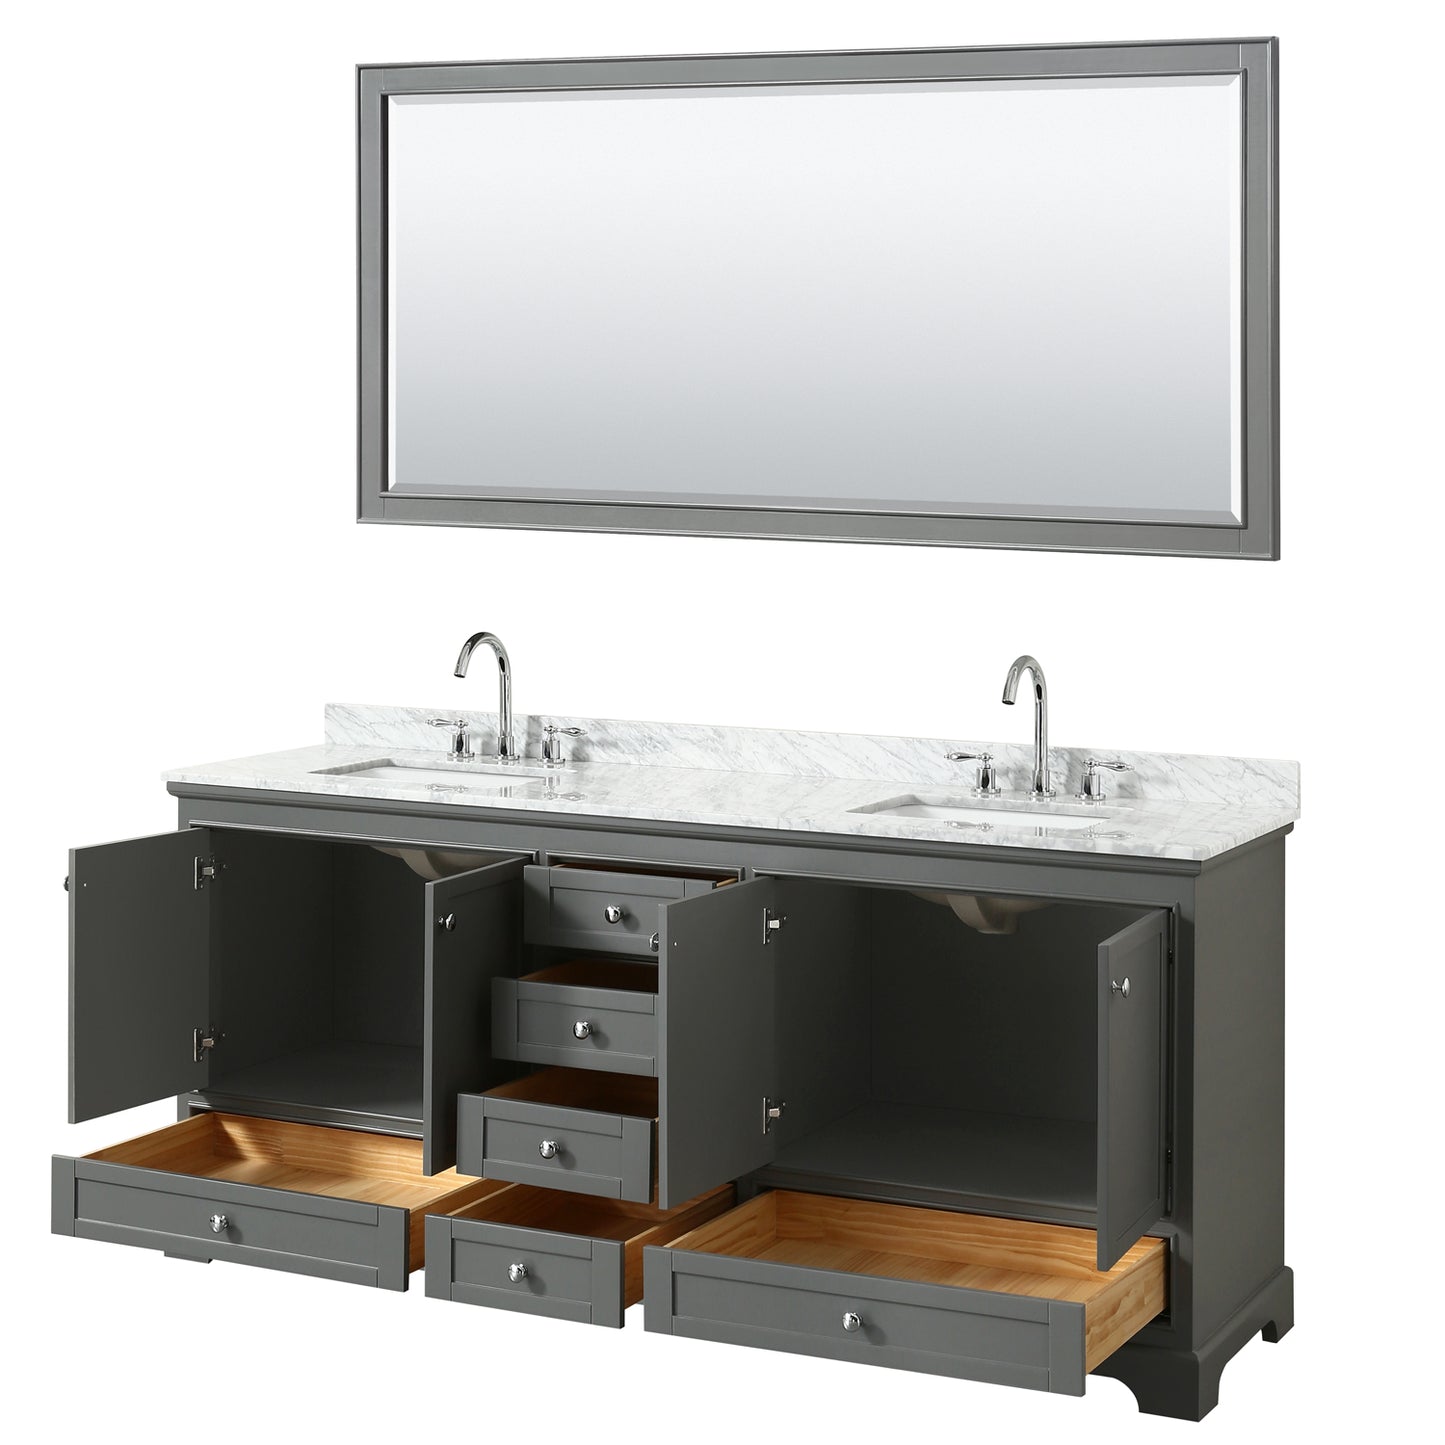 80 Inch Double Bathroom Vanity, White Carrara Marble Countertop, Undermount Square Sinks, and 70 Inch Mirror - Luxe Bathroom Vanities Luxury Bathroom Fixtures Bathroom Furniture